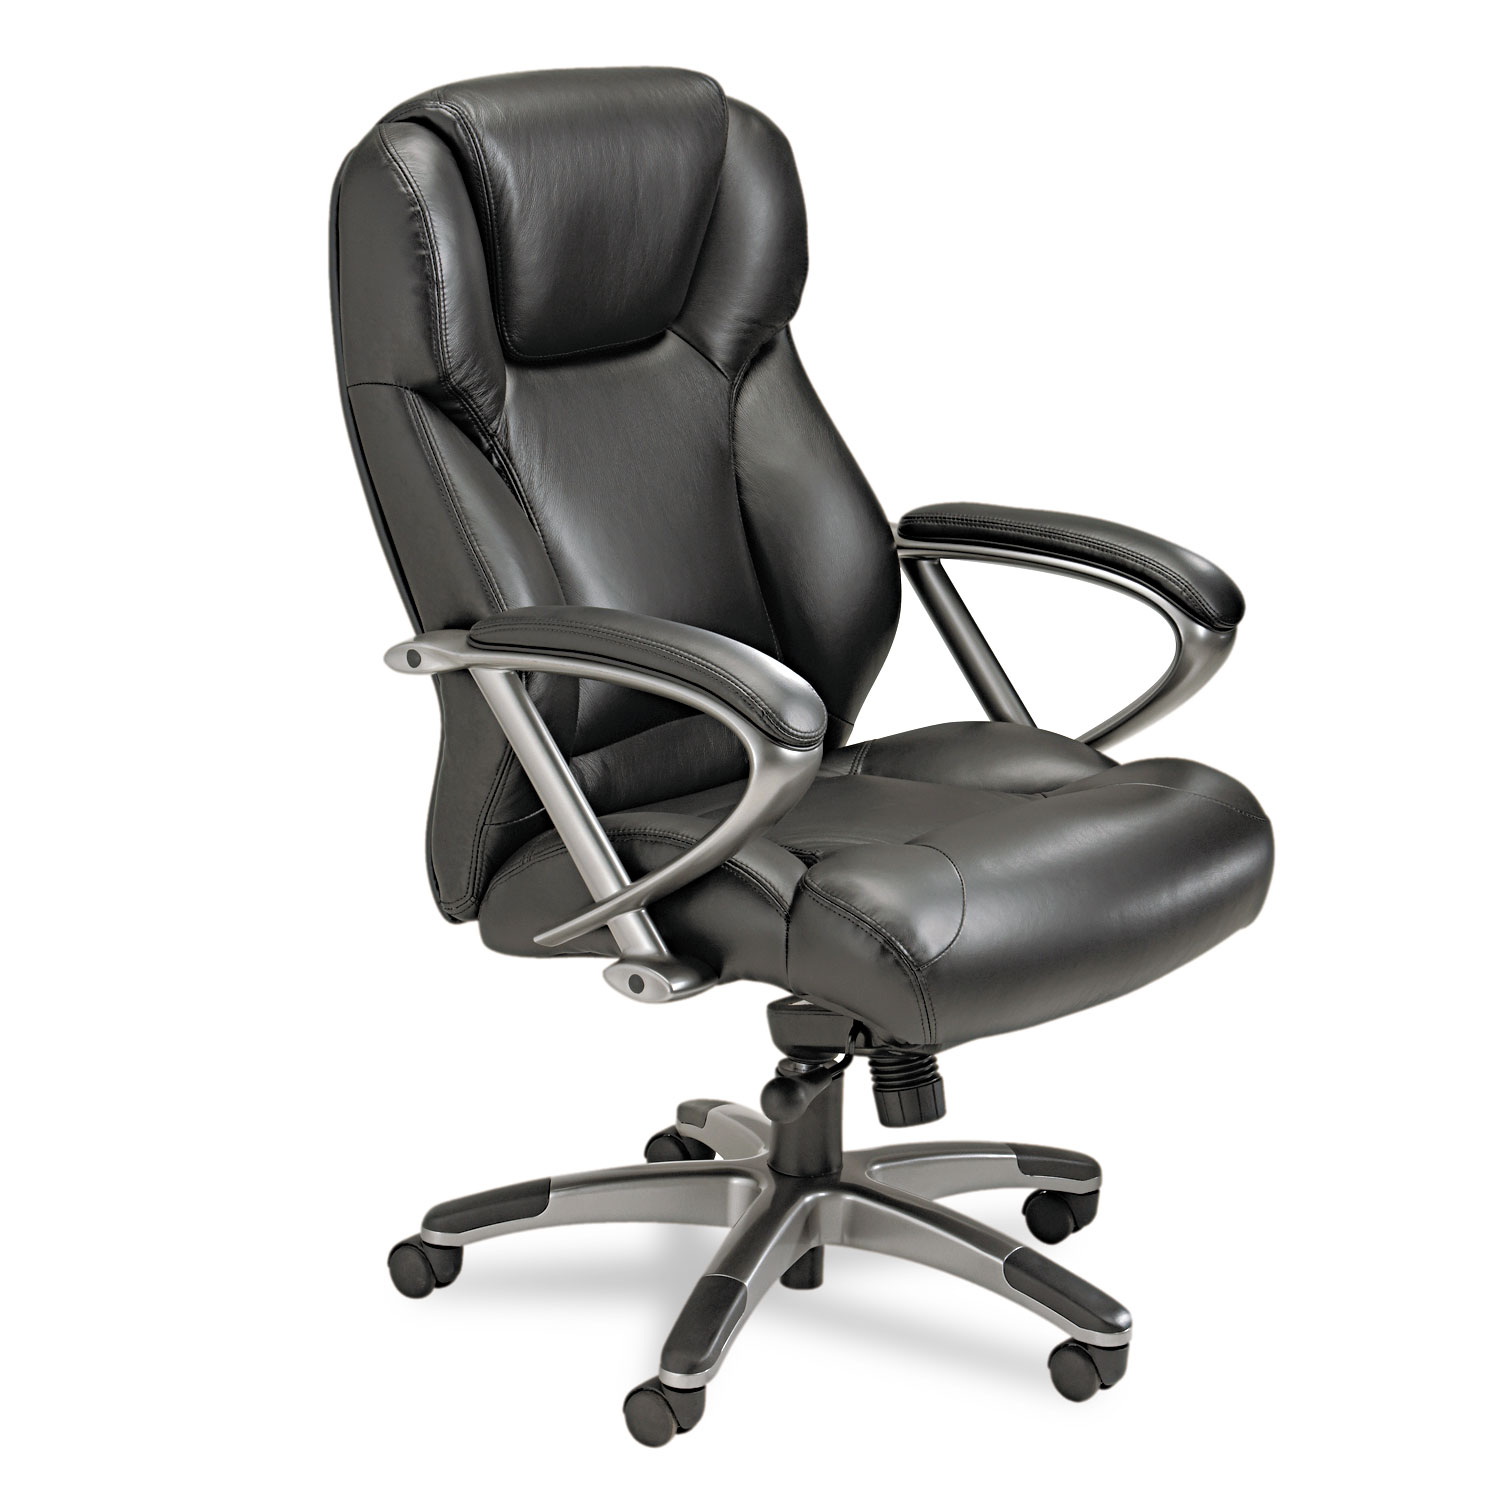 Leather Seating Series High-Back Swivel/Tilt Chair, Black Leather